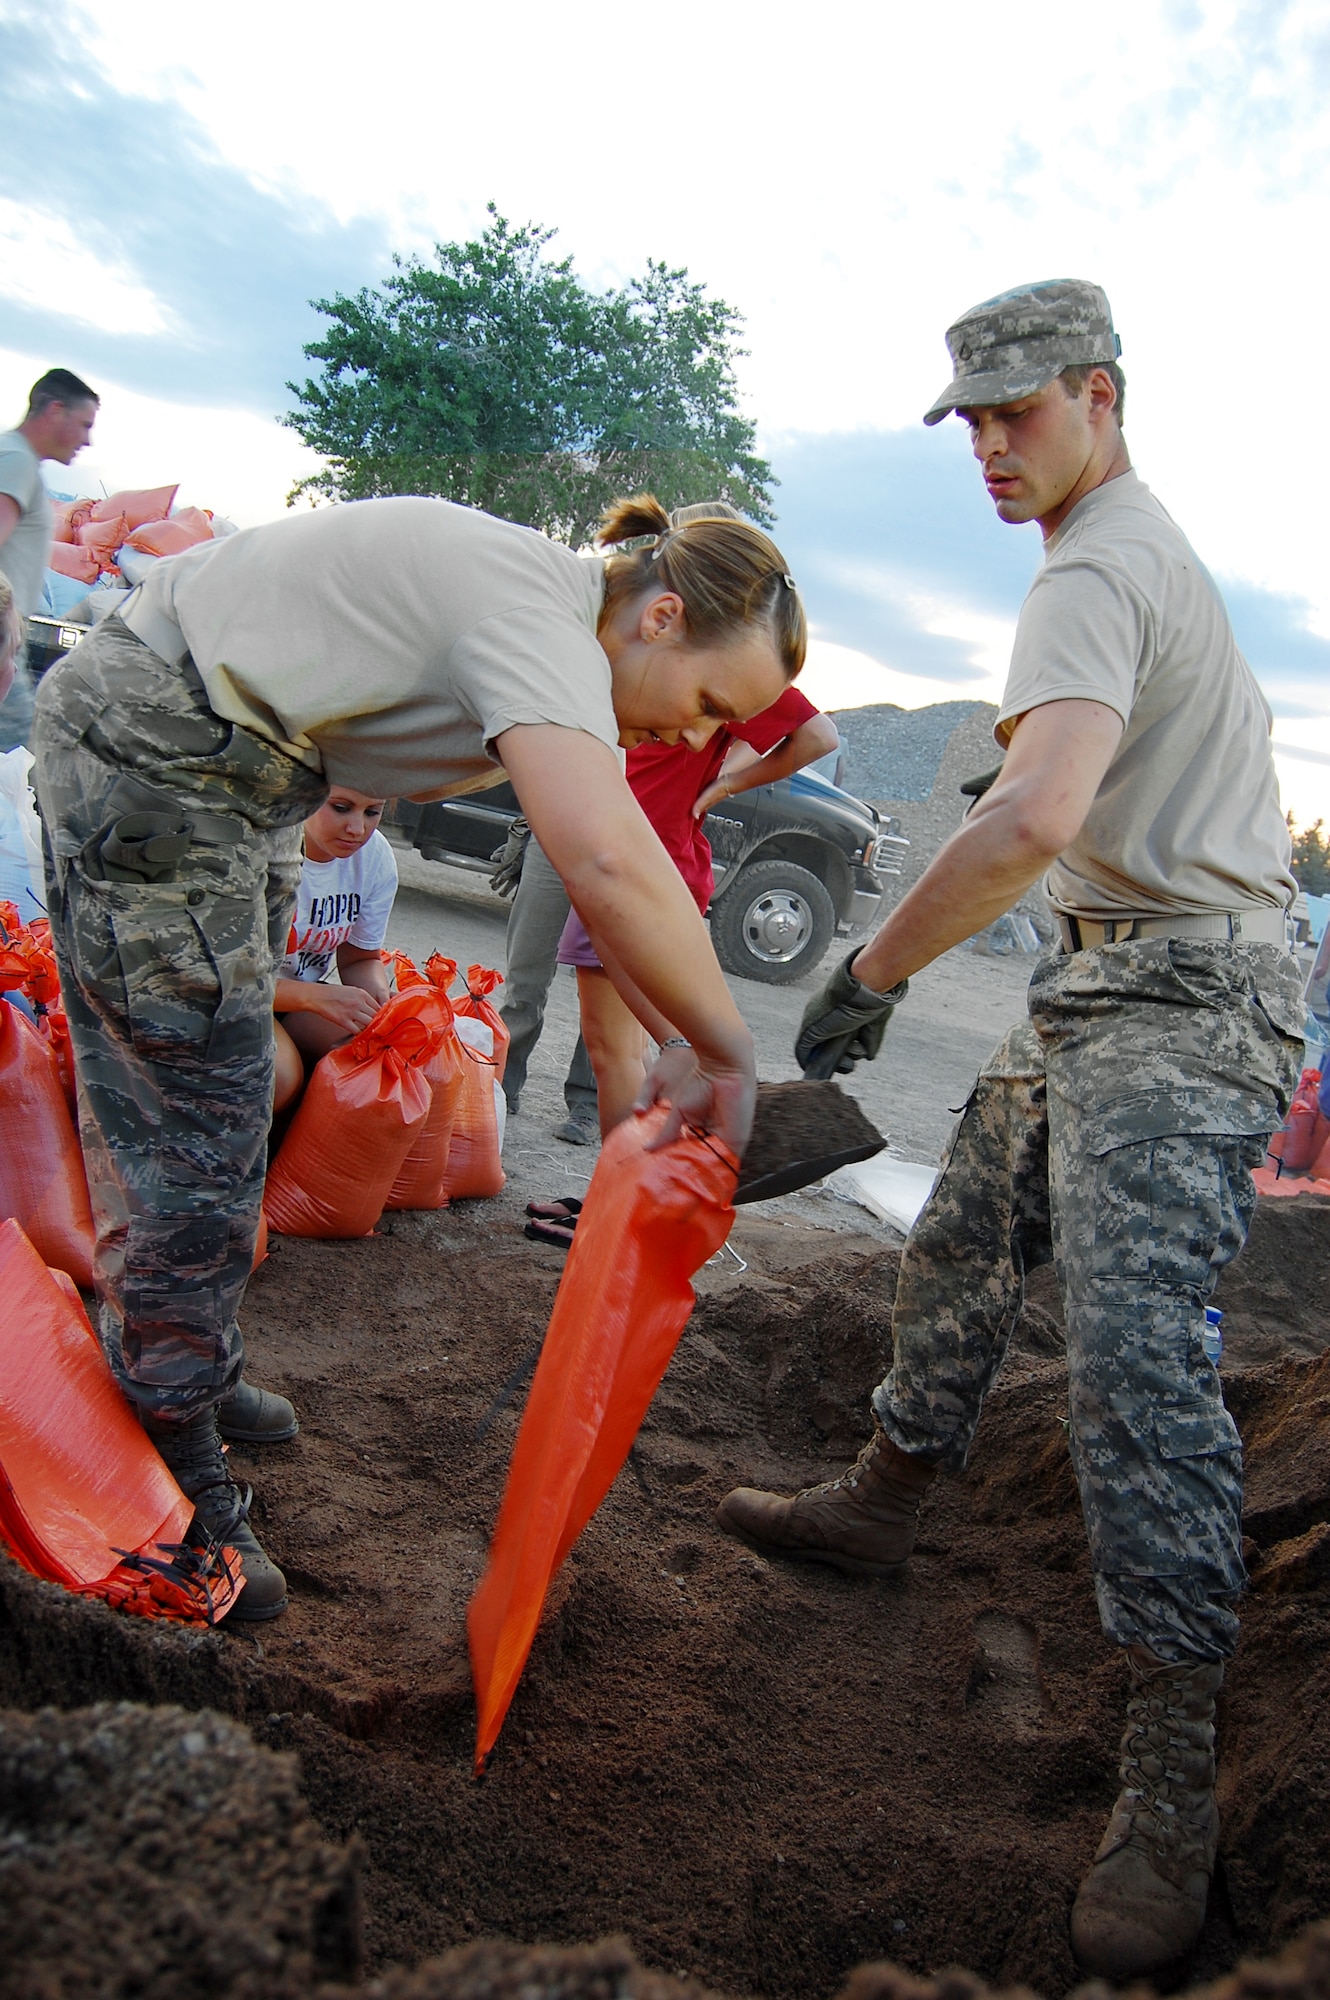 Staff Sgt. Niki Label and Pfc. Taylor Carlson fill sandbags to aid in stopping the rising flood waters of the Popo Agie River, June 11, 2010, in Fremont County, Wyo. Sergeant Label is assigned to the Wyoming Air National Guard's 187th Aeromedical Evacuation Squadron. Private Carlson is assigned to the Wyoming Army National Guard's A Battery, 2-300th Field Artillery. (Photo by Christian Venhuizen)